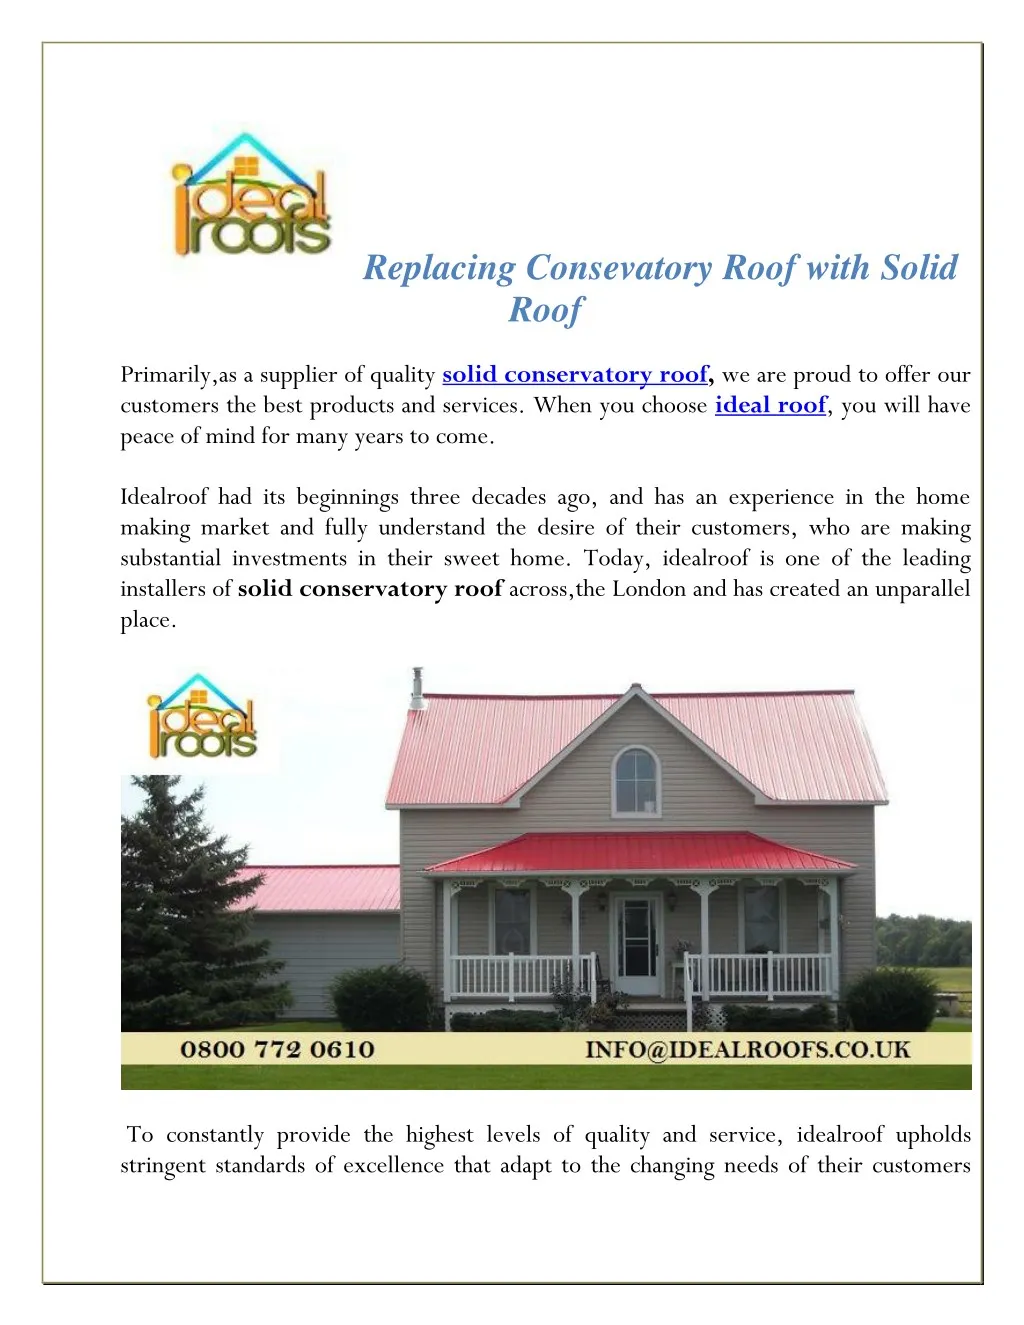 replacing consevatory roof with solid roof